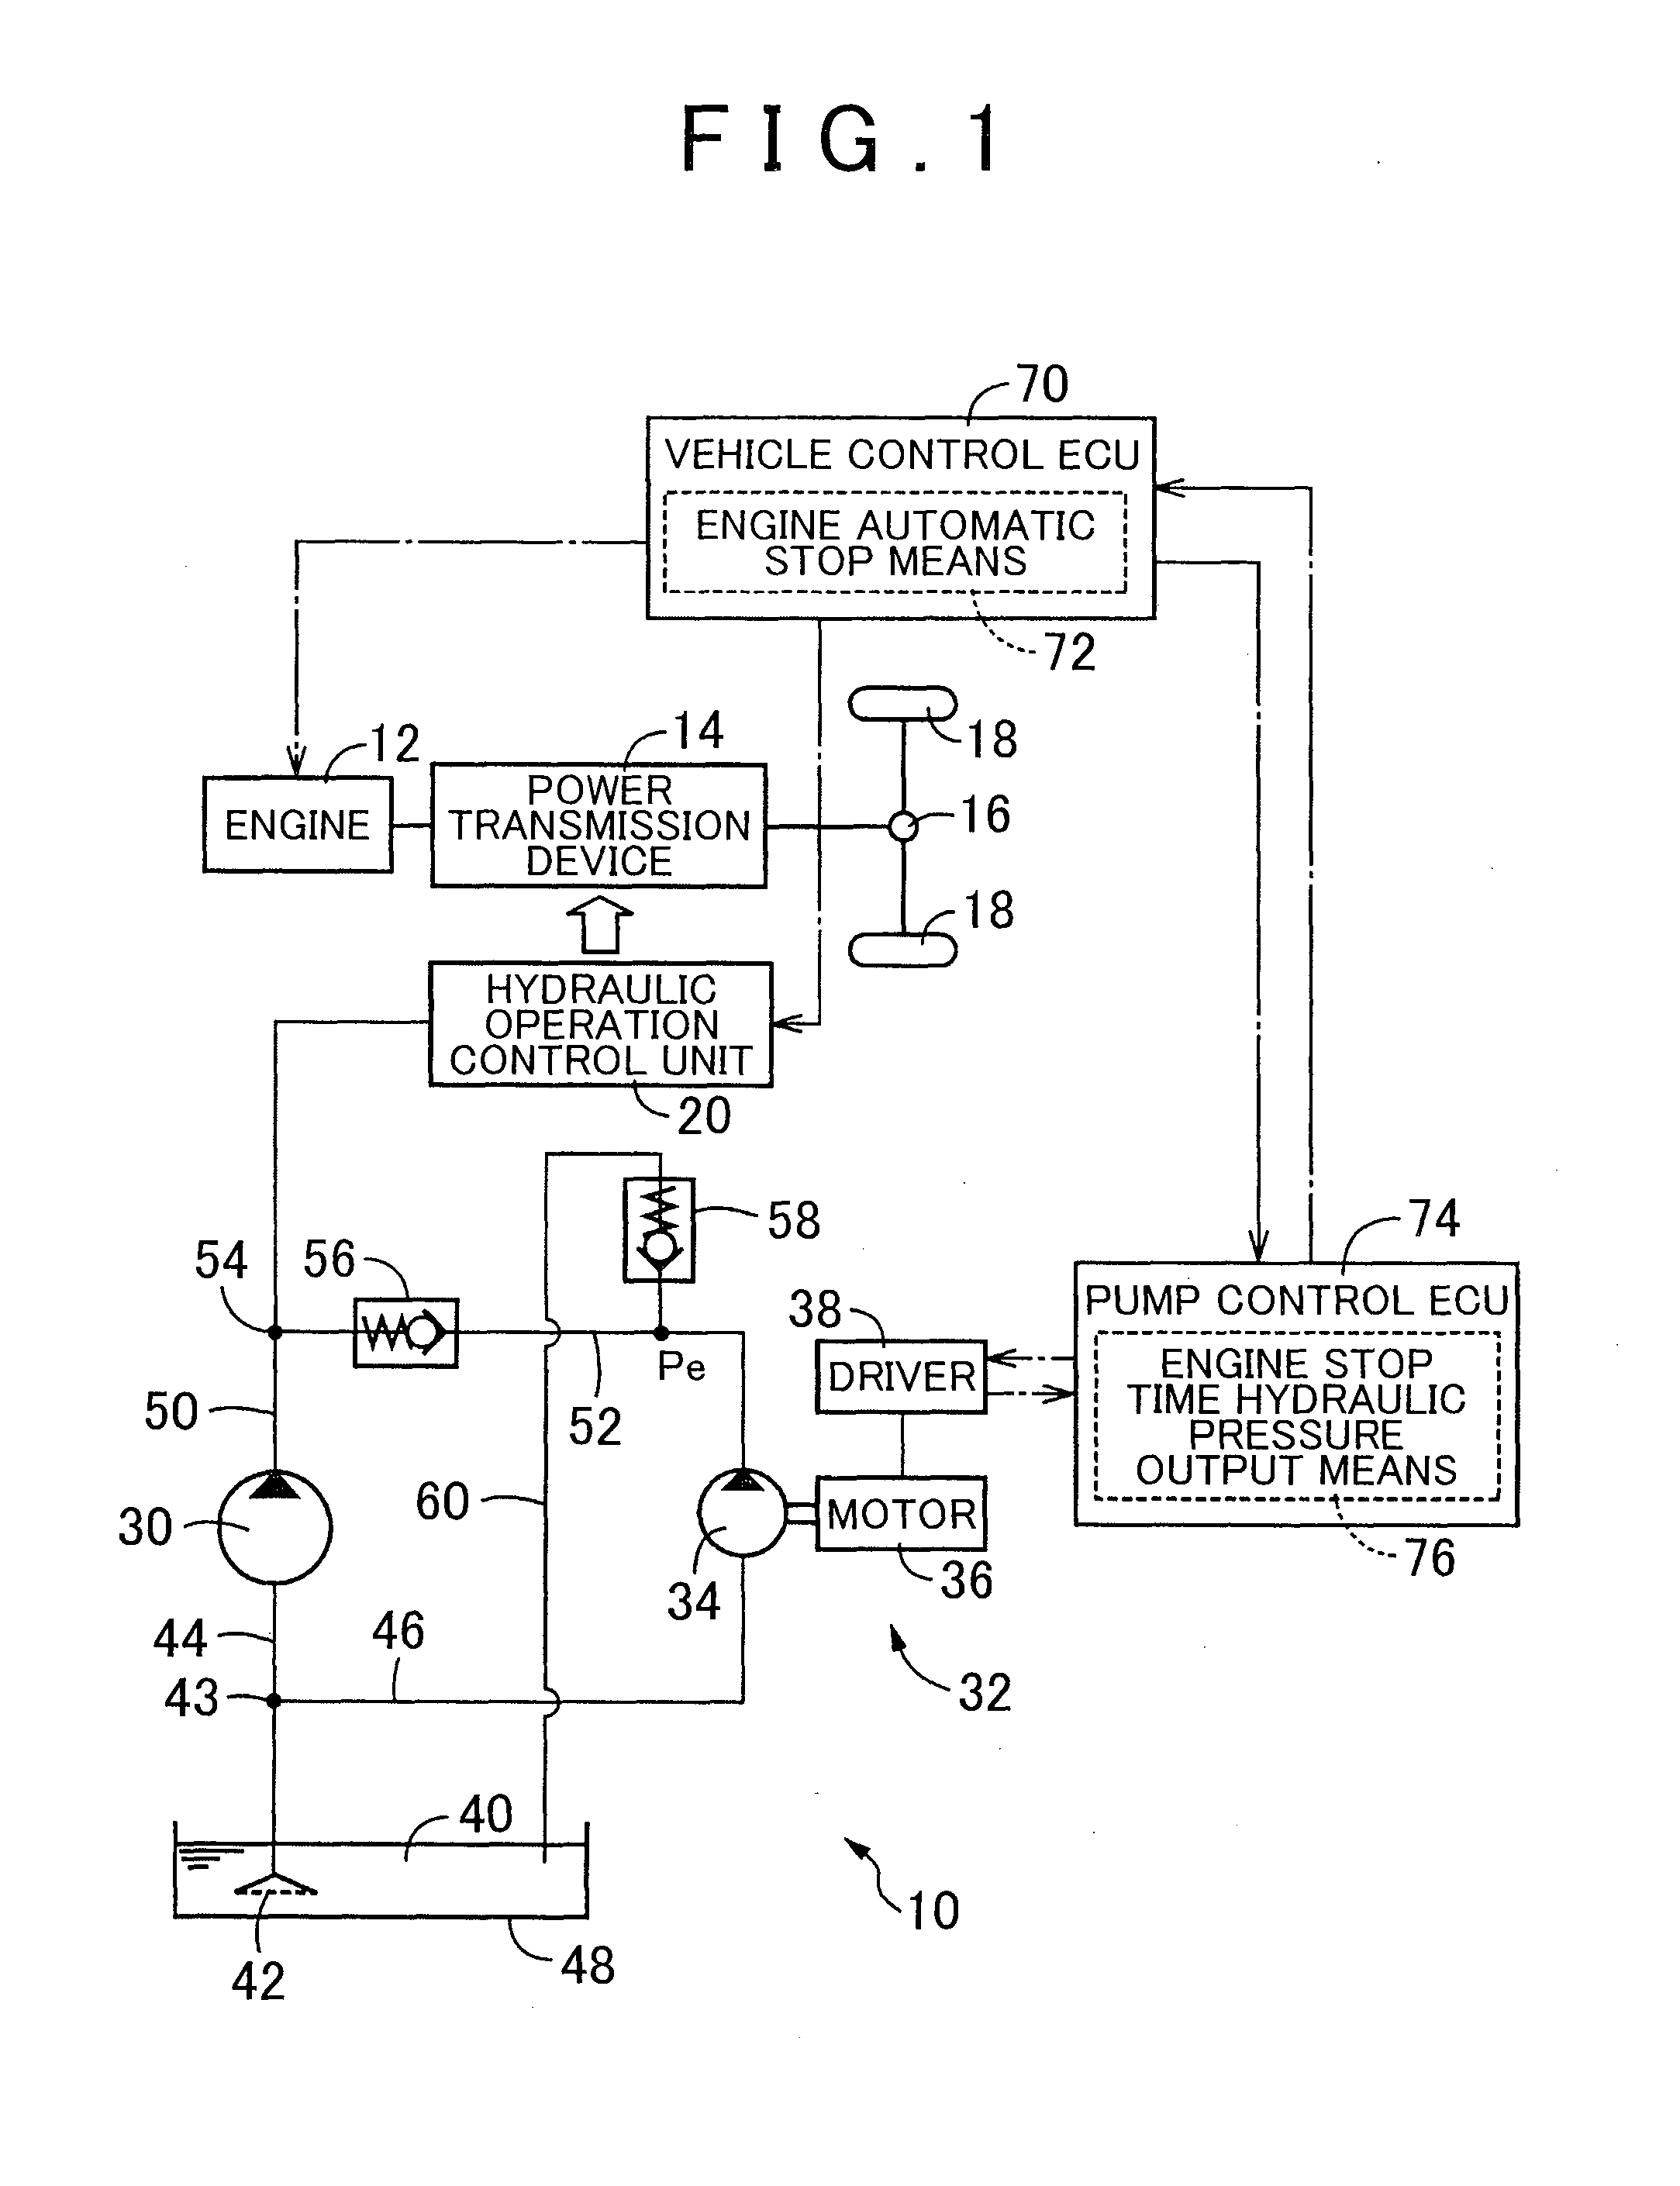 Hydraulic circuit for power transmission device of vehicle